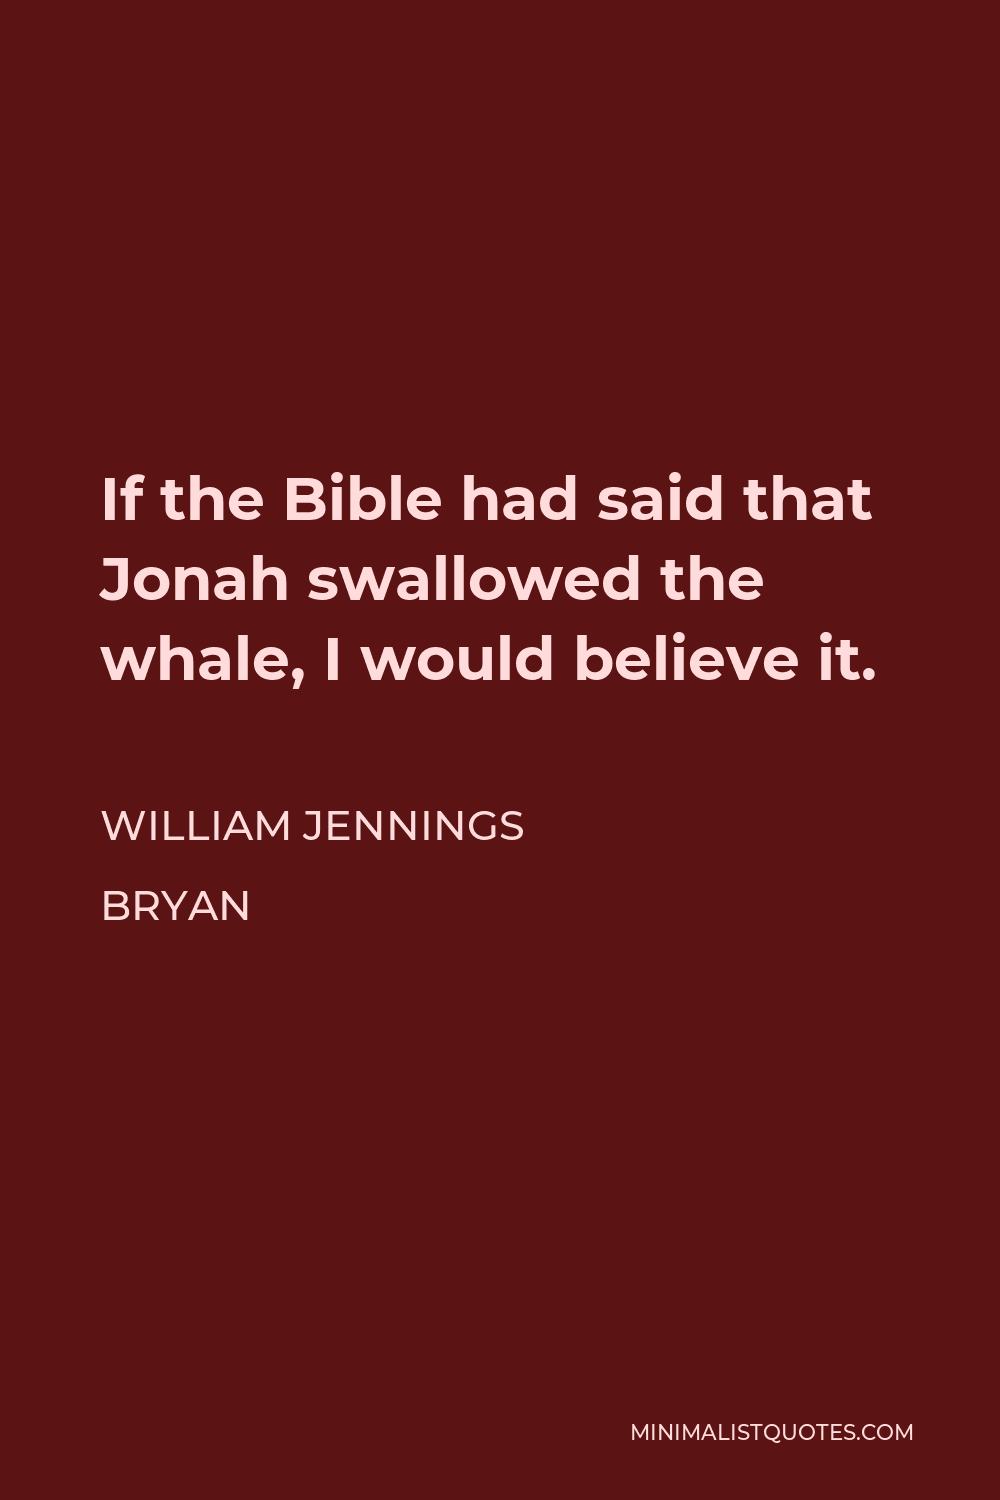 William Jennings Bryan Quote - If the Bible had said that Jonah swallowed the whale, I would believe it.